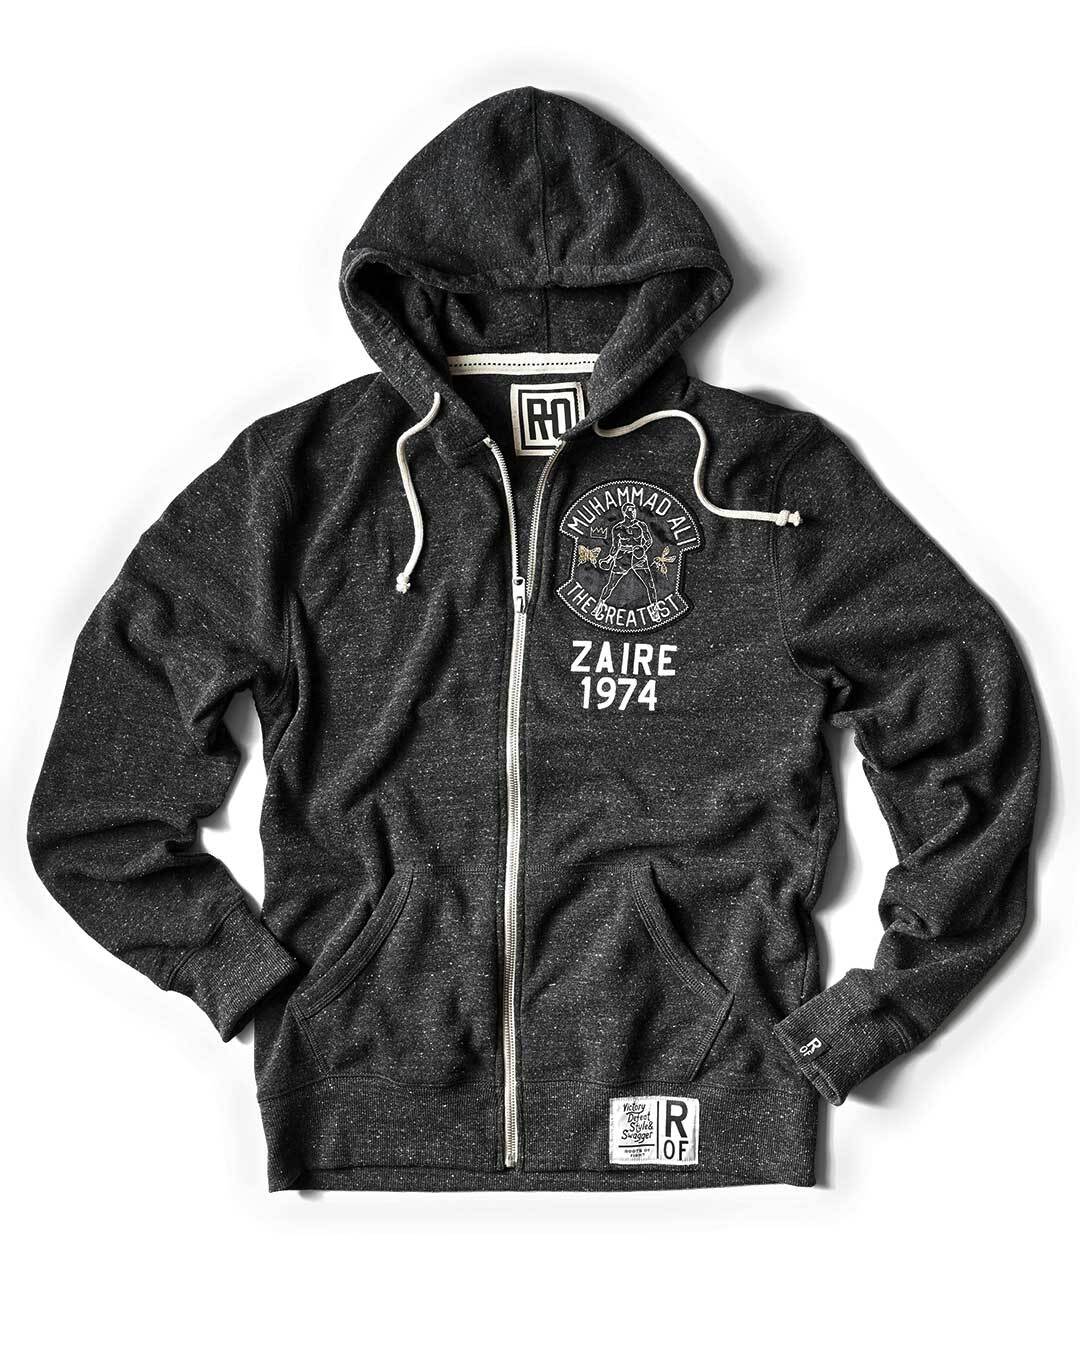 Rumble in the Jungle Anniversary Black FZ Hoody - Roots of Fight